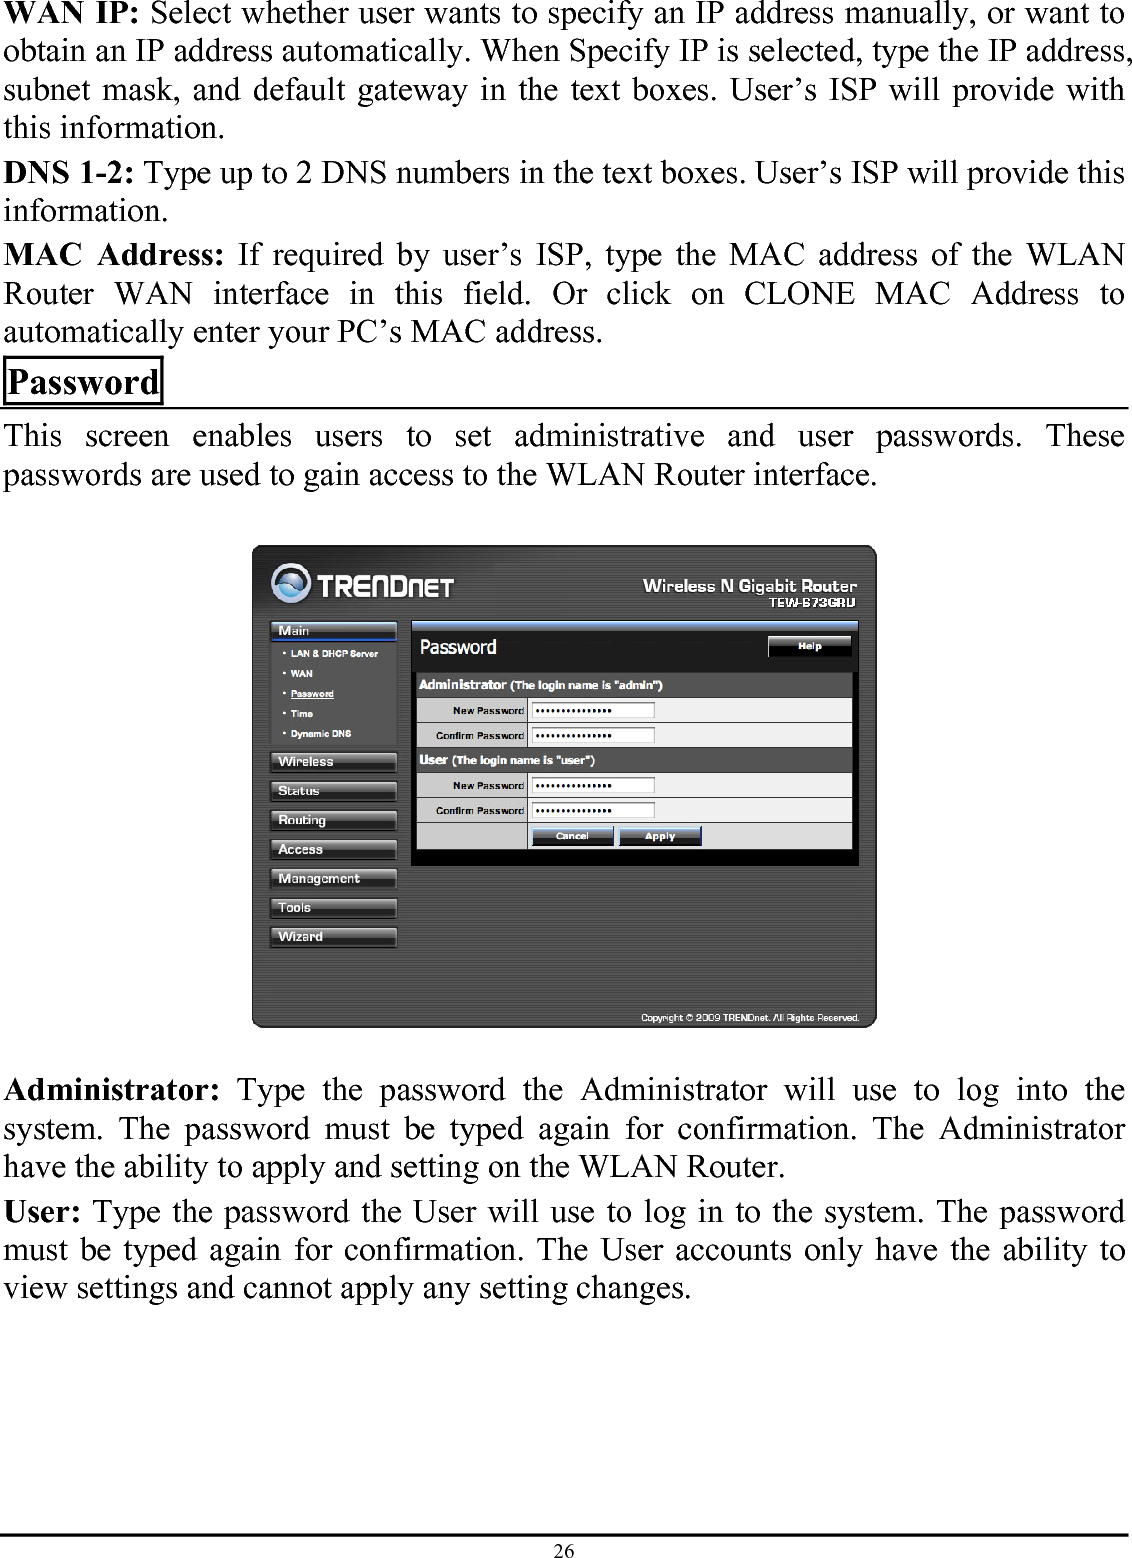 26 WAN IP: Select whether user wants to specify an IP address manually, or want to obtain an IP address automatically. When Specify IP is selected, type the IP address, subnet mask, and default gateway in the text boxes. User’s ISP will provide with this information. DNS 1-2: Type up to 2 DNS numbers in the text boxes. User’s ISP will provide this information. MAC Address: If required by user’s ISP, type the MAC address of the WLAN Router WAN interface in this field. Or click on CLONE MAC Address to automatically enter your PC’s MAC address.  Password This screen enables users to set administrative and user passwords. These passwords are used to gain access to the WLAN Router interface.    Administrator: Type the password the Administrator will use to log into the system. The password must be typed again for confirmation. The Administrator have the ability to apply and setting on the WLAN Router. User: Type the password the User will use to log in to the system. The password must be typed again for confirmation. The User accounts only have the ability to view settings and cannot apply any setting changes.  